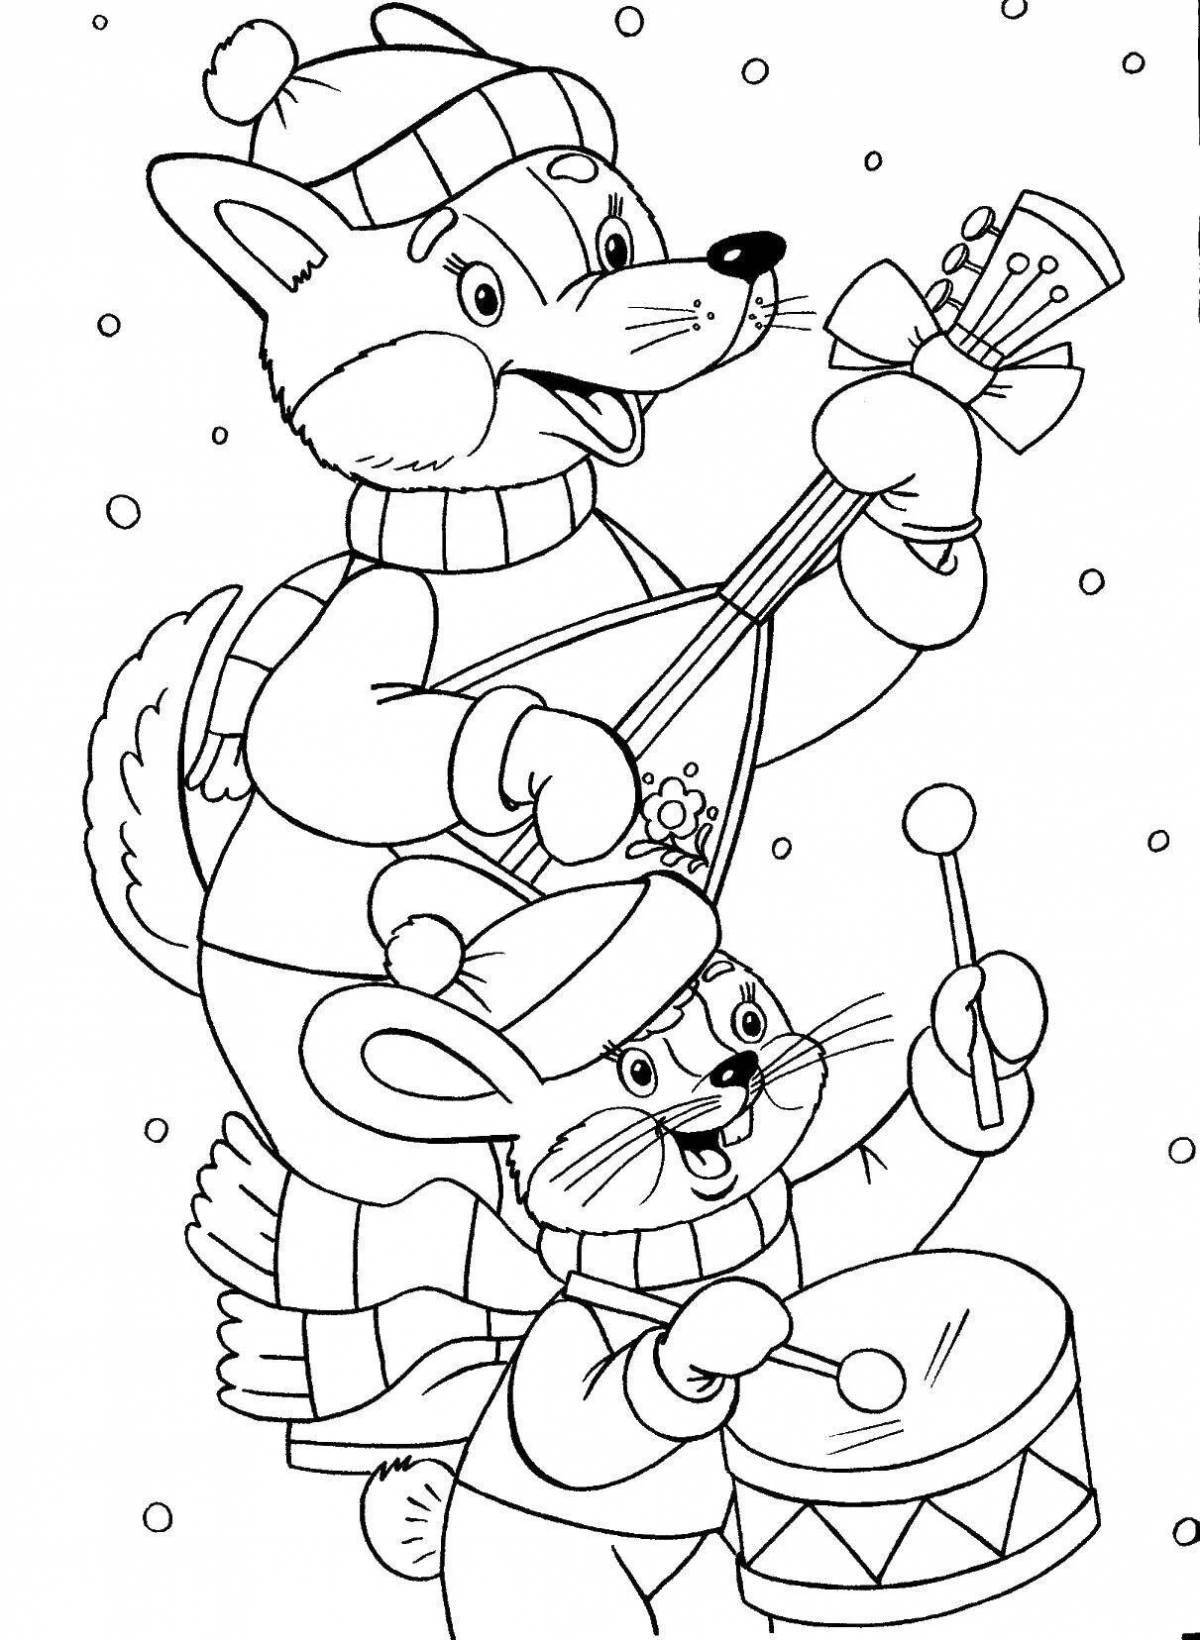 Animated santa claus and rabbit coloring page